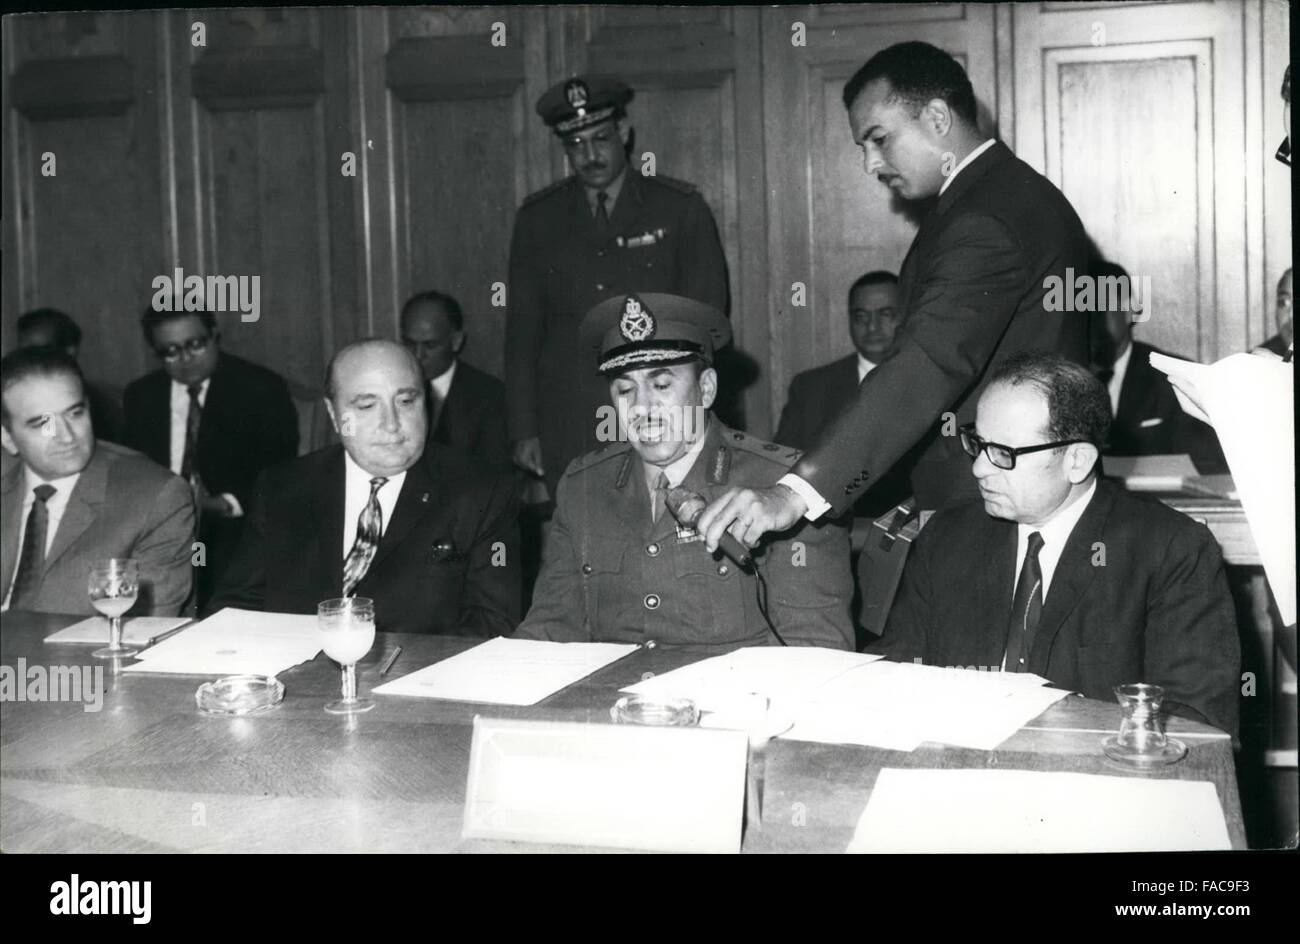 1968 - Arab Defence Chiefs Meet In Cairo: The Joint Arab Defence Council Started It Meet Here This Morning. In The Inaugural Speech, Arab League Secretary Gen Abdel Khalek Hassouna Pointed Out That The Agenda Was ? On Disc? Means Of Consolidating Arab Front Line Against Israel. The Meeting Was By Arab Foreign And Defence Ministers And General Mohammed Ahmed Sadek Of Staff Of Uar Forces Who Was Sworn Last Thursday As Arab League Secretary Of Military Affairs. Ops) General Mohammed Ahmed El Sadek While Giving Oath Flanked By Arab League Assistant Secretaries, Dr. Sayed Nofal (R) And Assad El (C Stock Photo